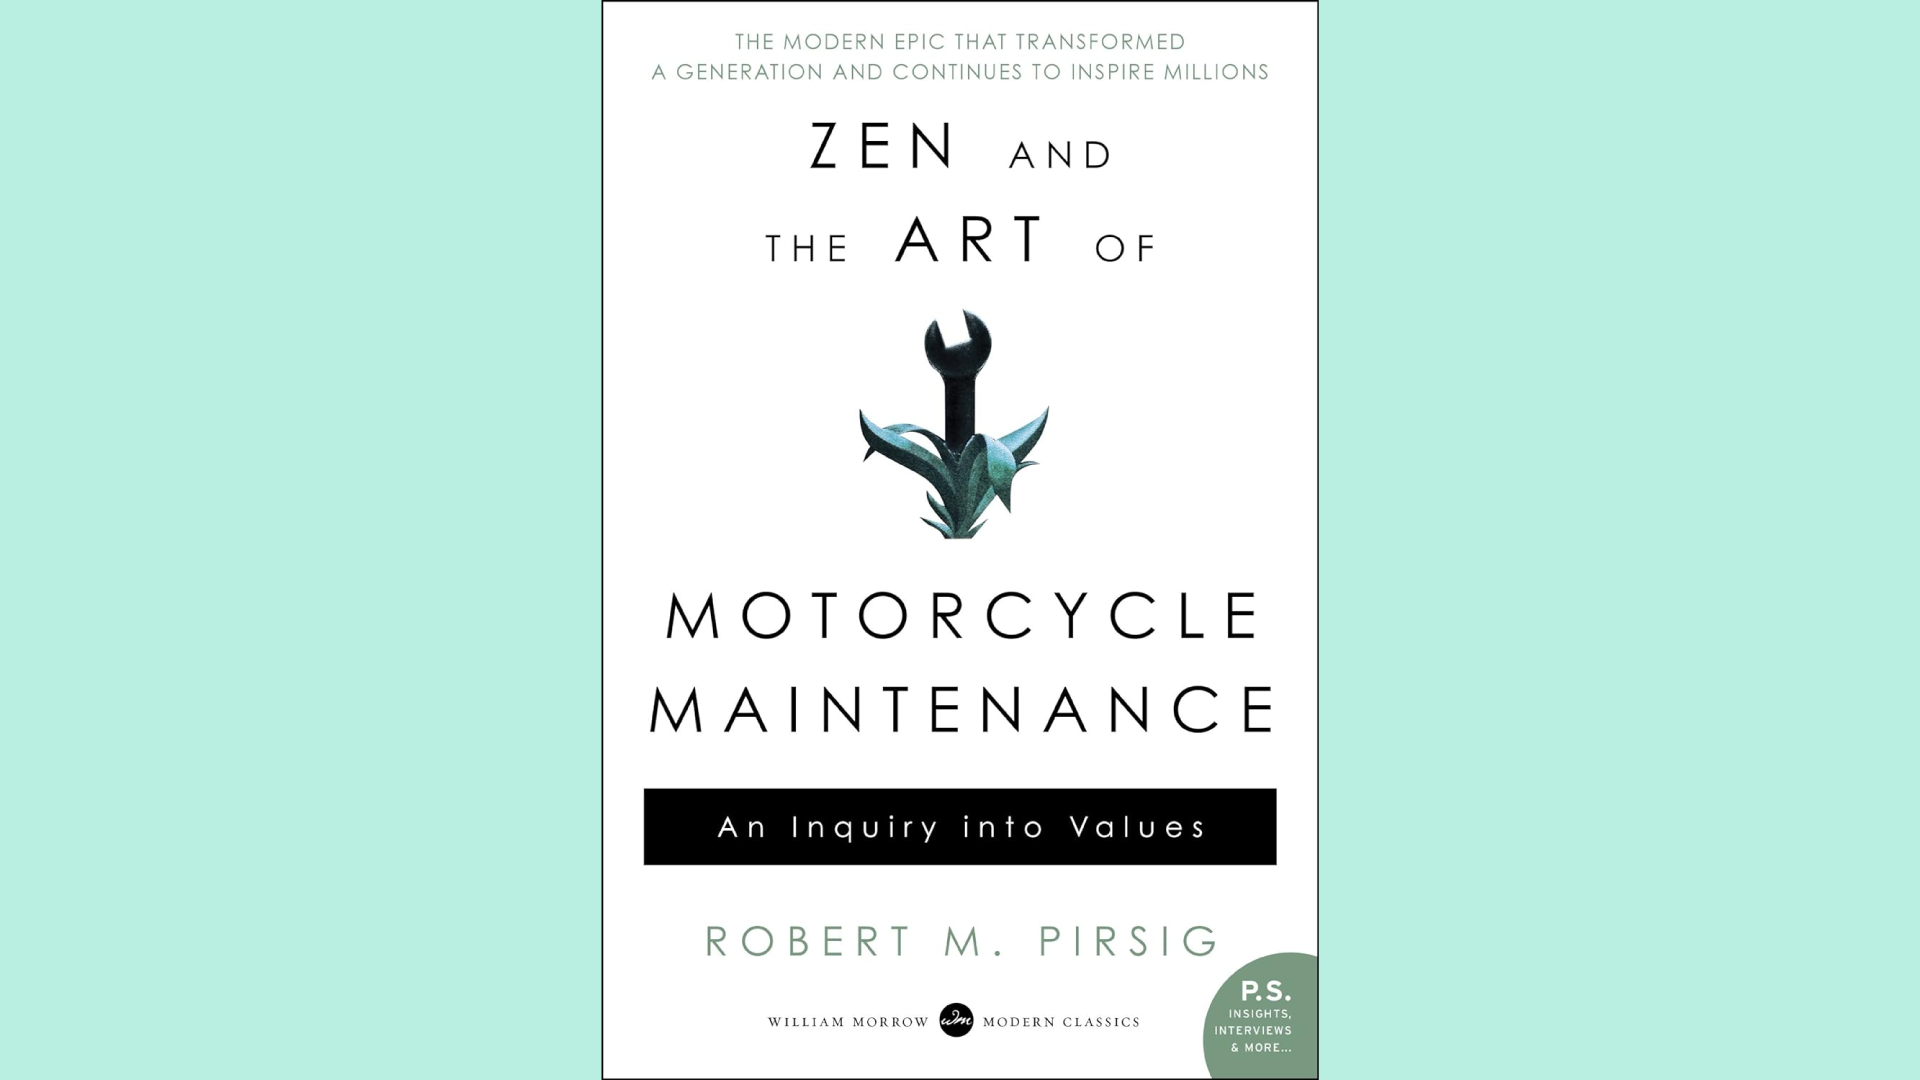 Summary Zen and the Art of Motorcycle Maintenance by Robert M. Pirsig